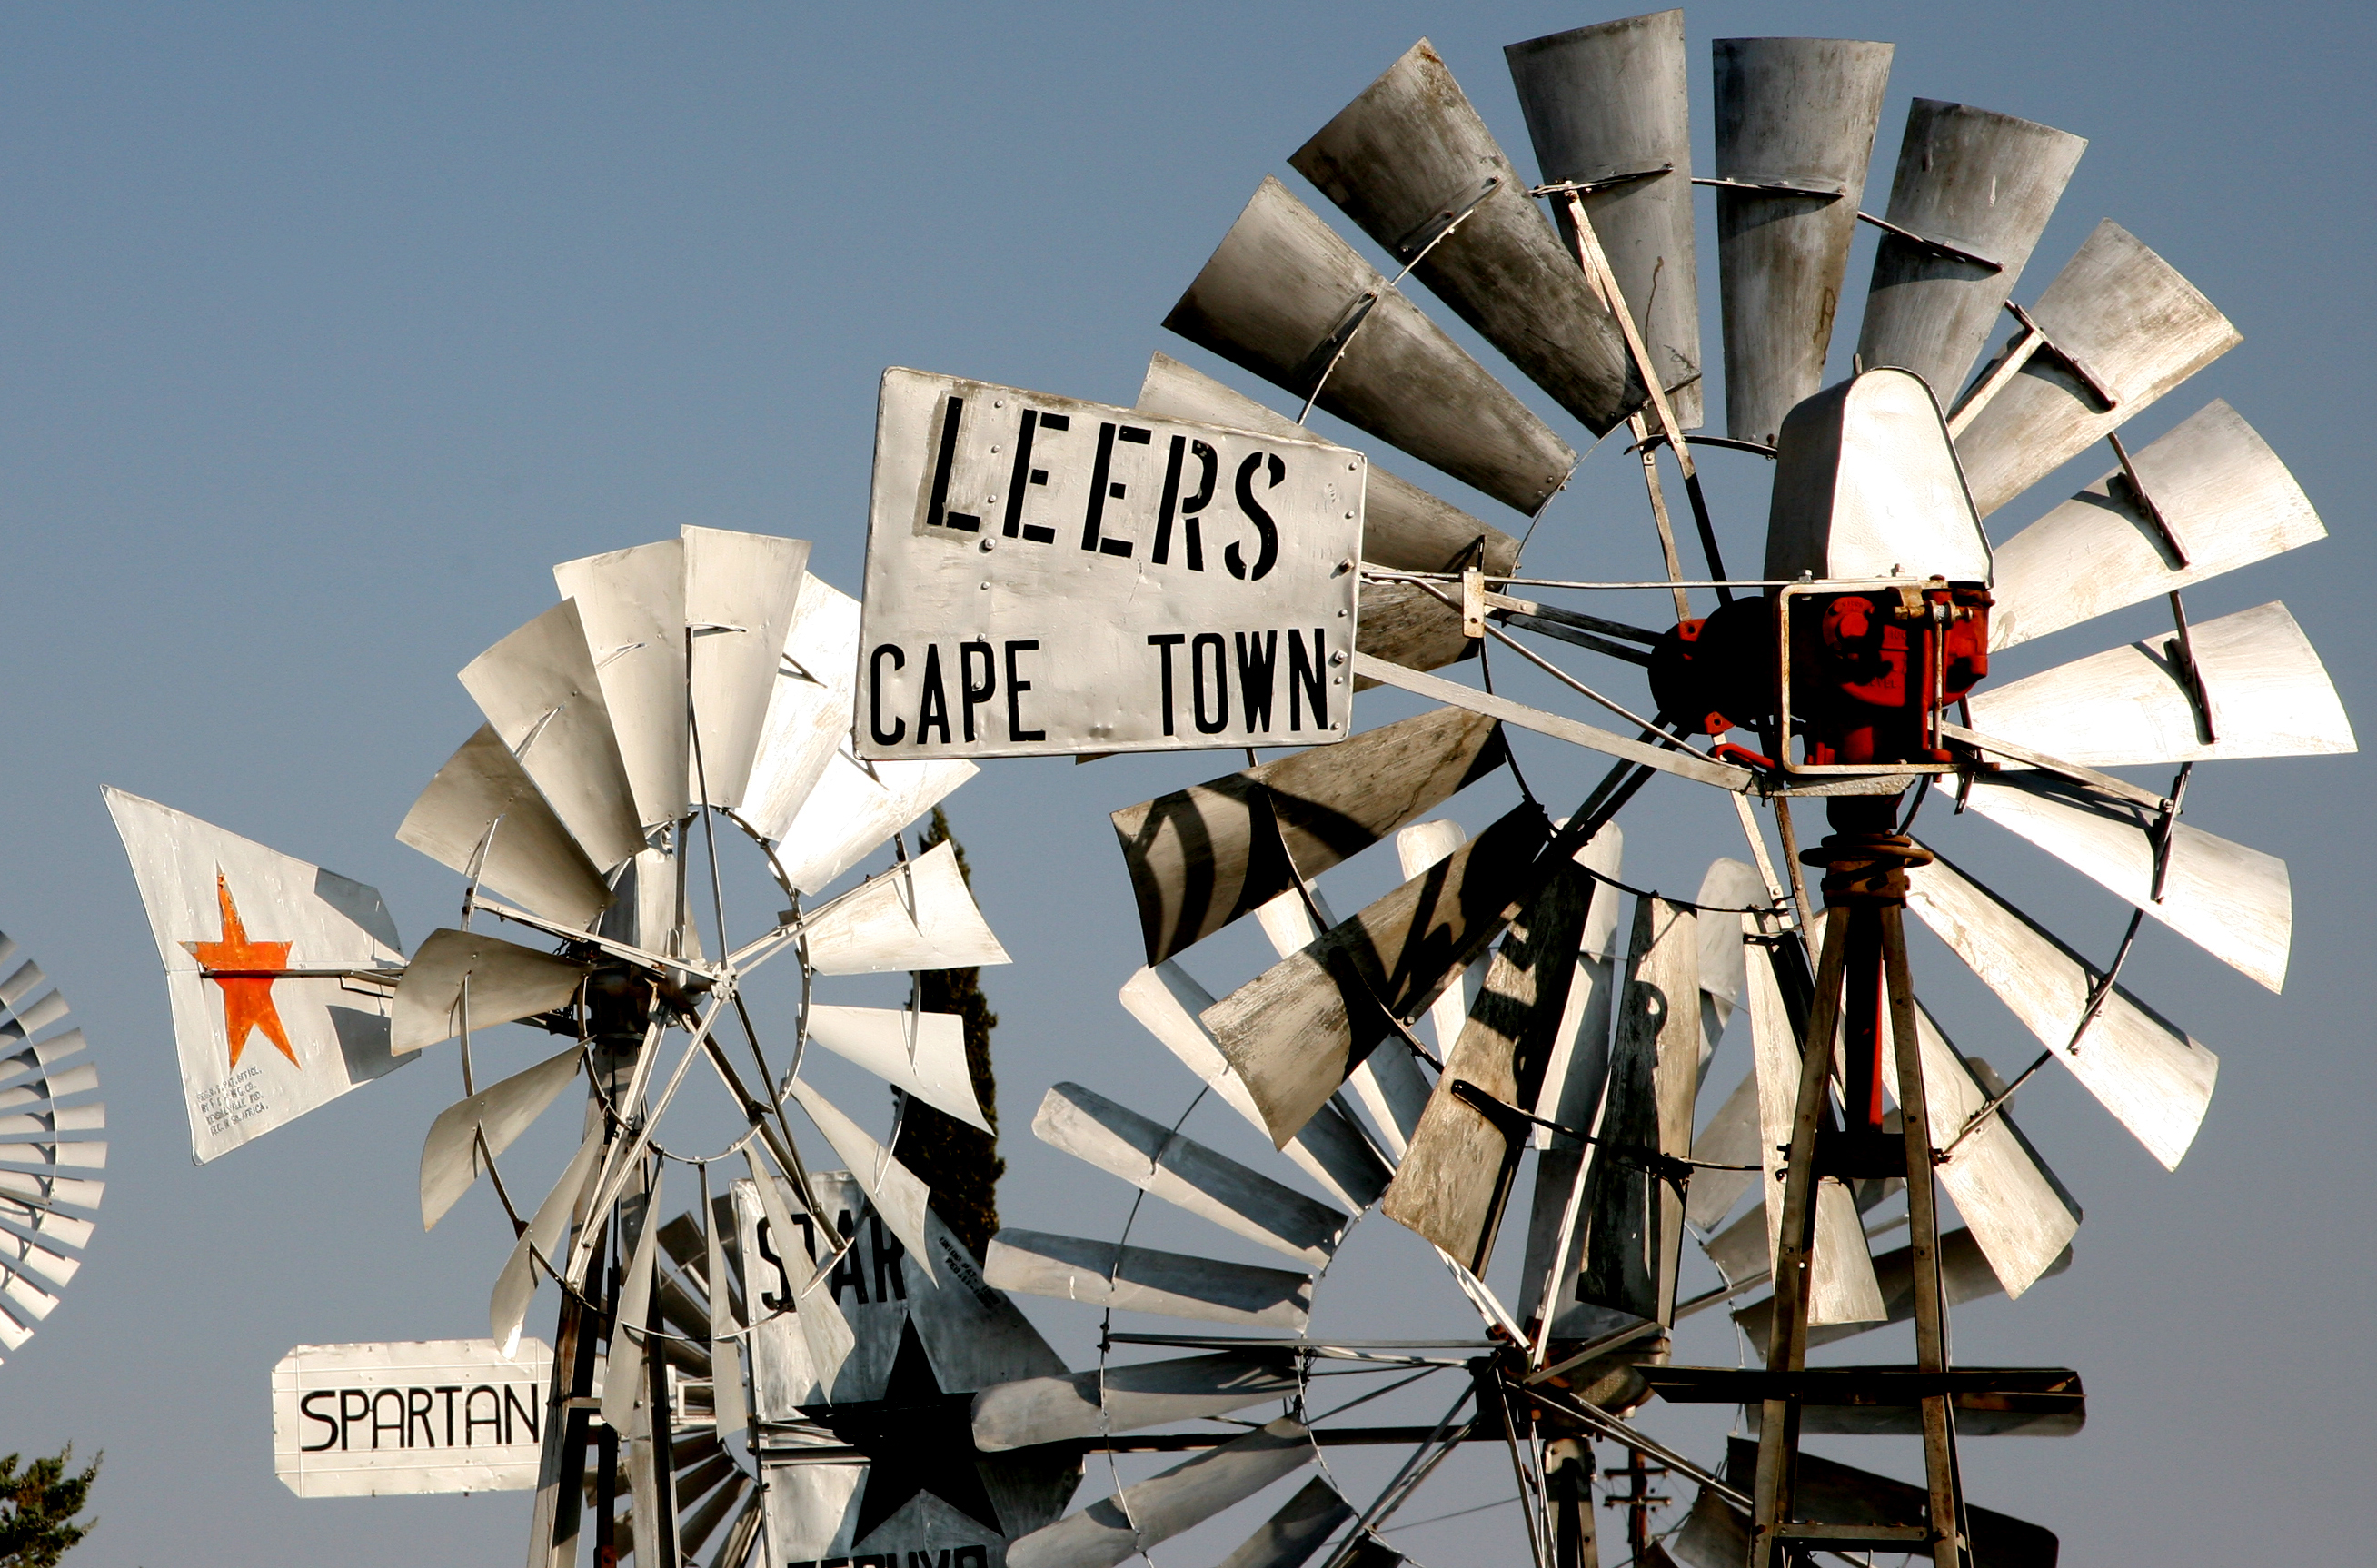 In the thrifty drylands, if it works, it stays. The Karoo remains a stronghold of windpumps. Image: Chris Marais